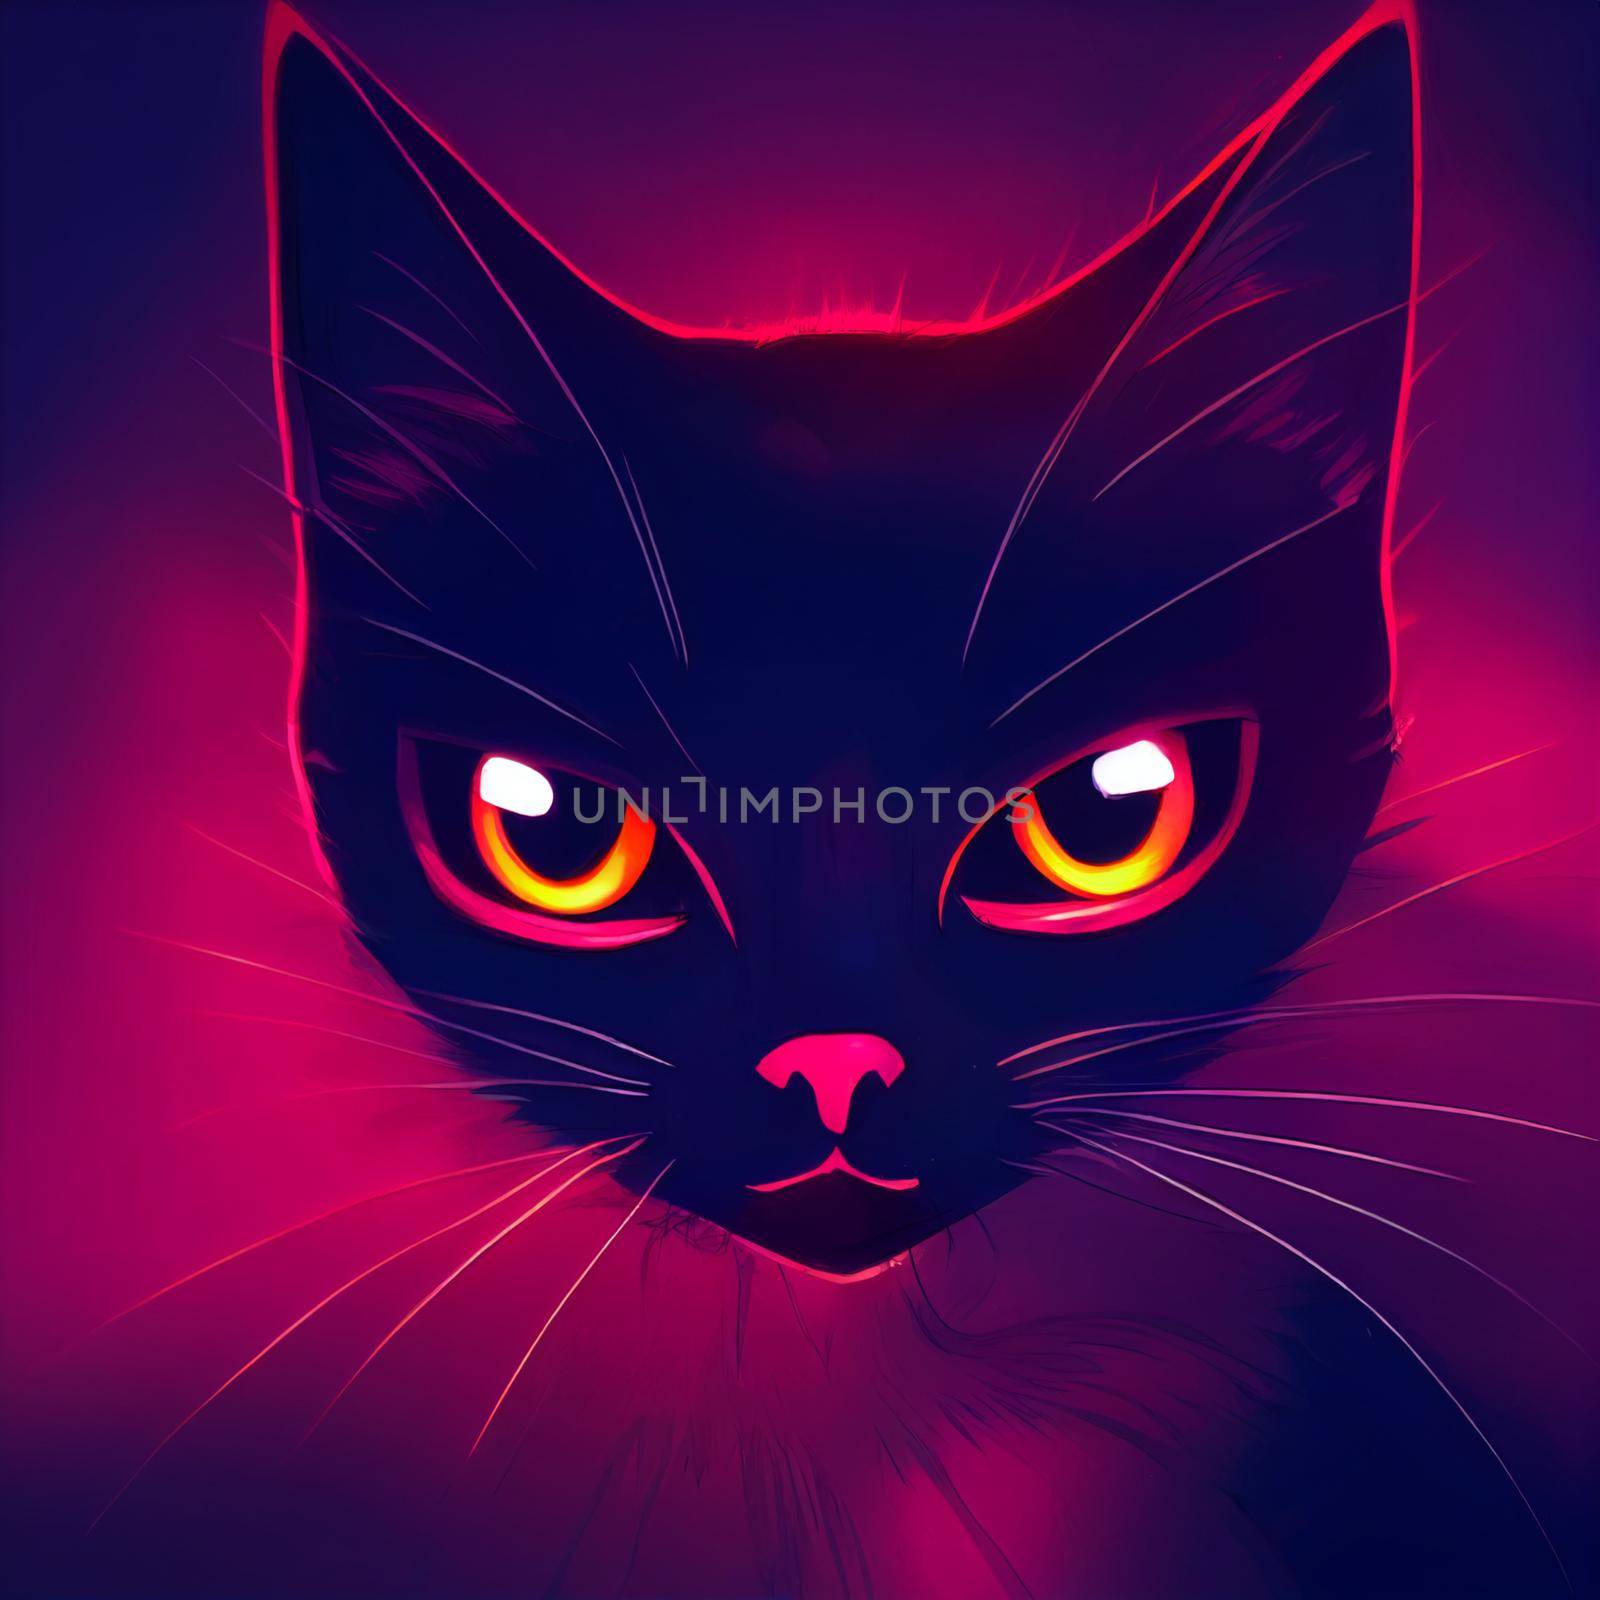 Illustration of a cat in purple light. High quality illustration